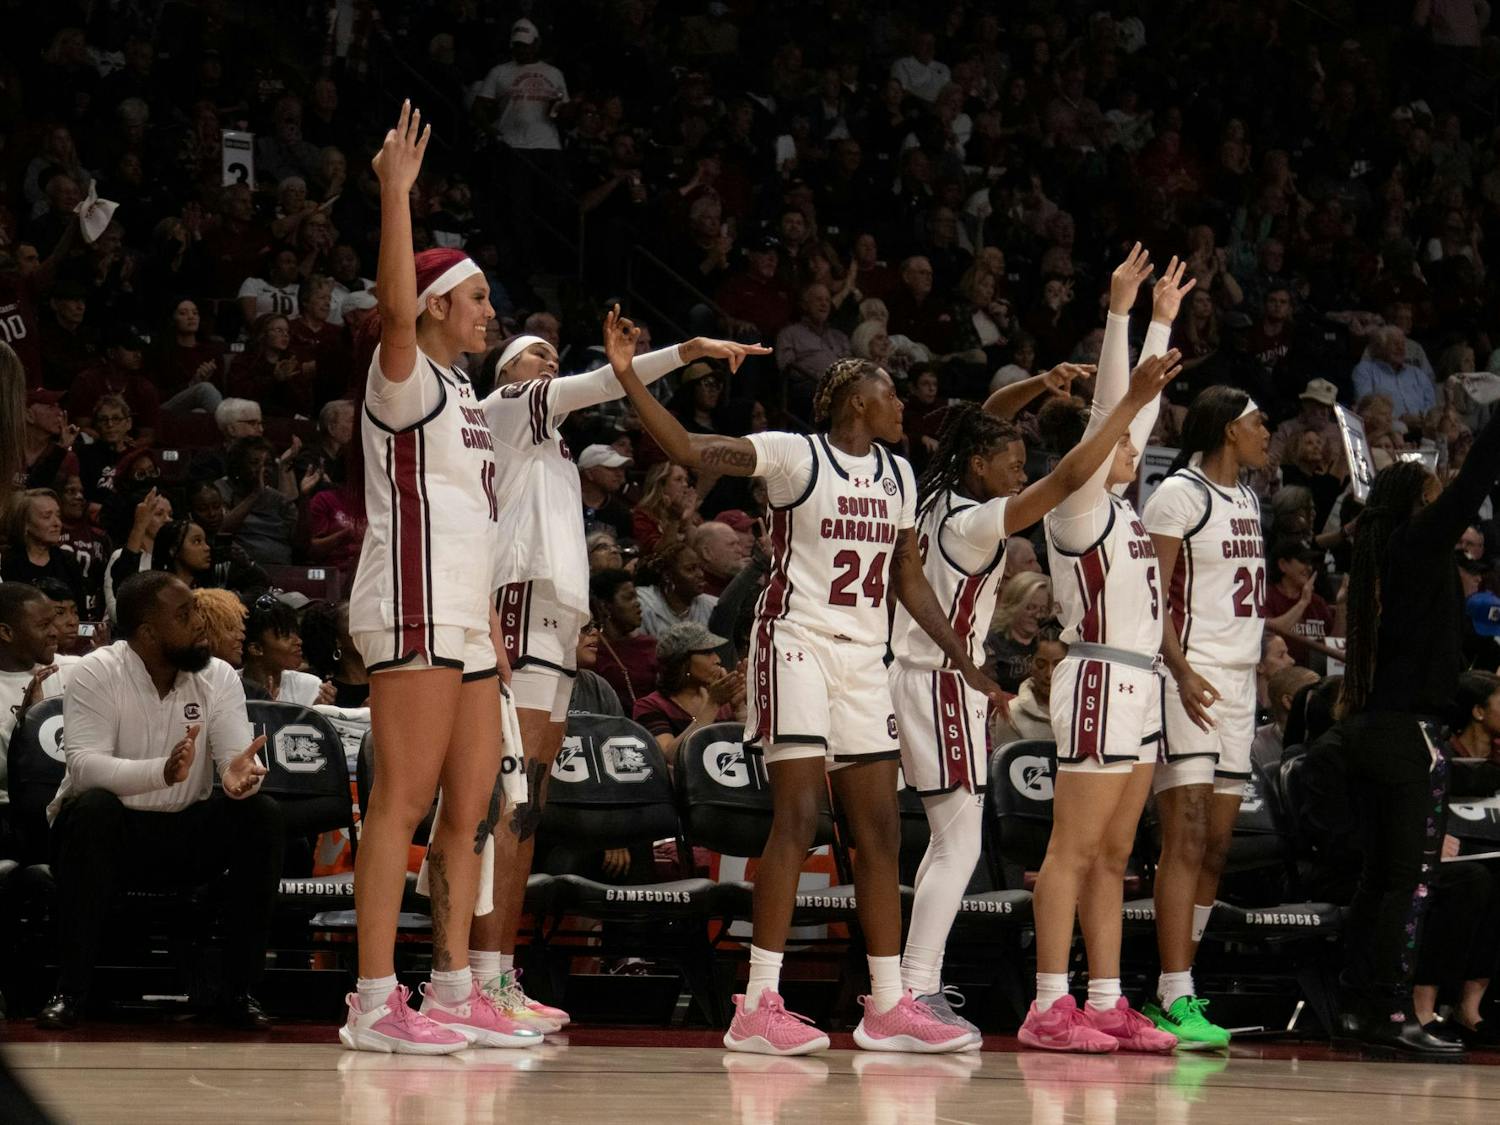 FILE — Members of the South Carolina women's basketball team celebrate a 3-pointer shot during its game against Maryland on Nov. 12, 2023. The Gamecocks defeated the Testudos 114-76, and the team is currently undefeated.